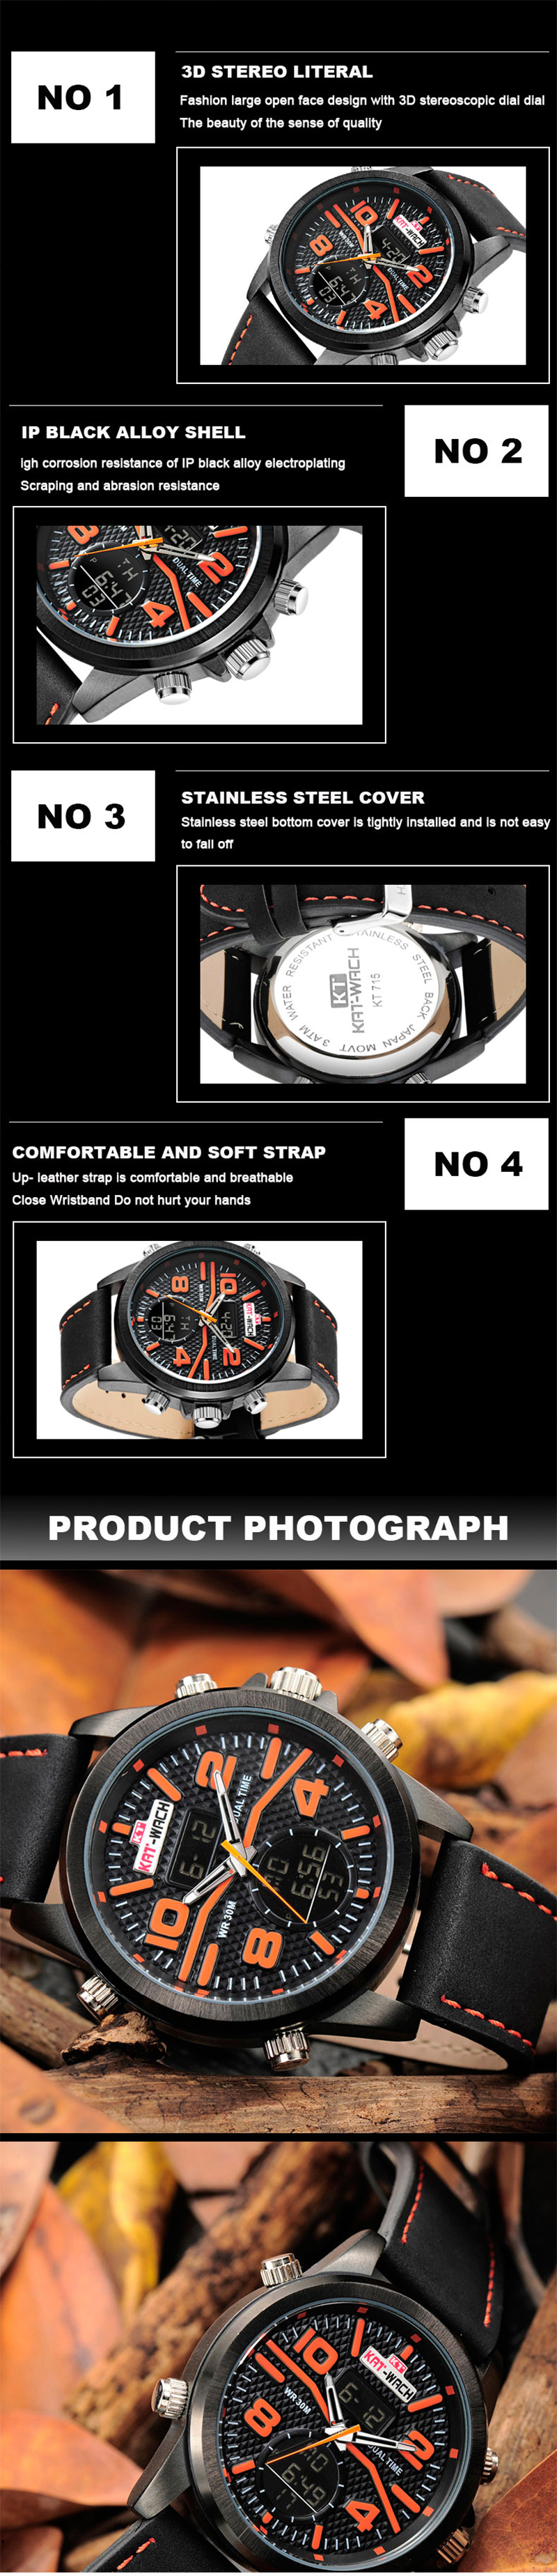 KAT-WACH-KT715-Dual-Display-Digital-Watch-Large-Numbers-Leather-Chronograph-Men-Outdoor-Sport-Watch-1290470